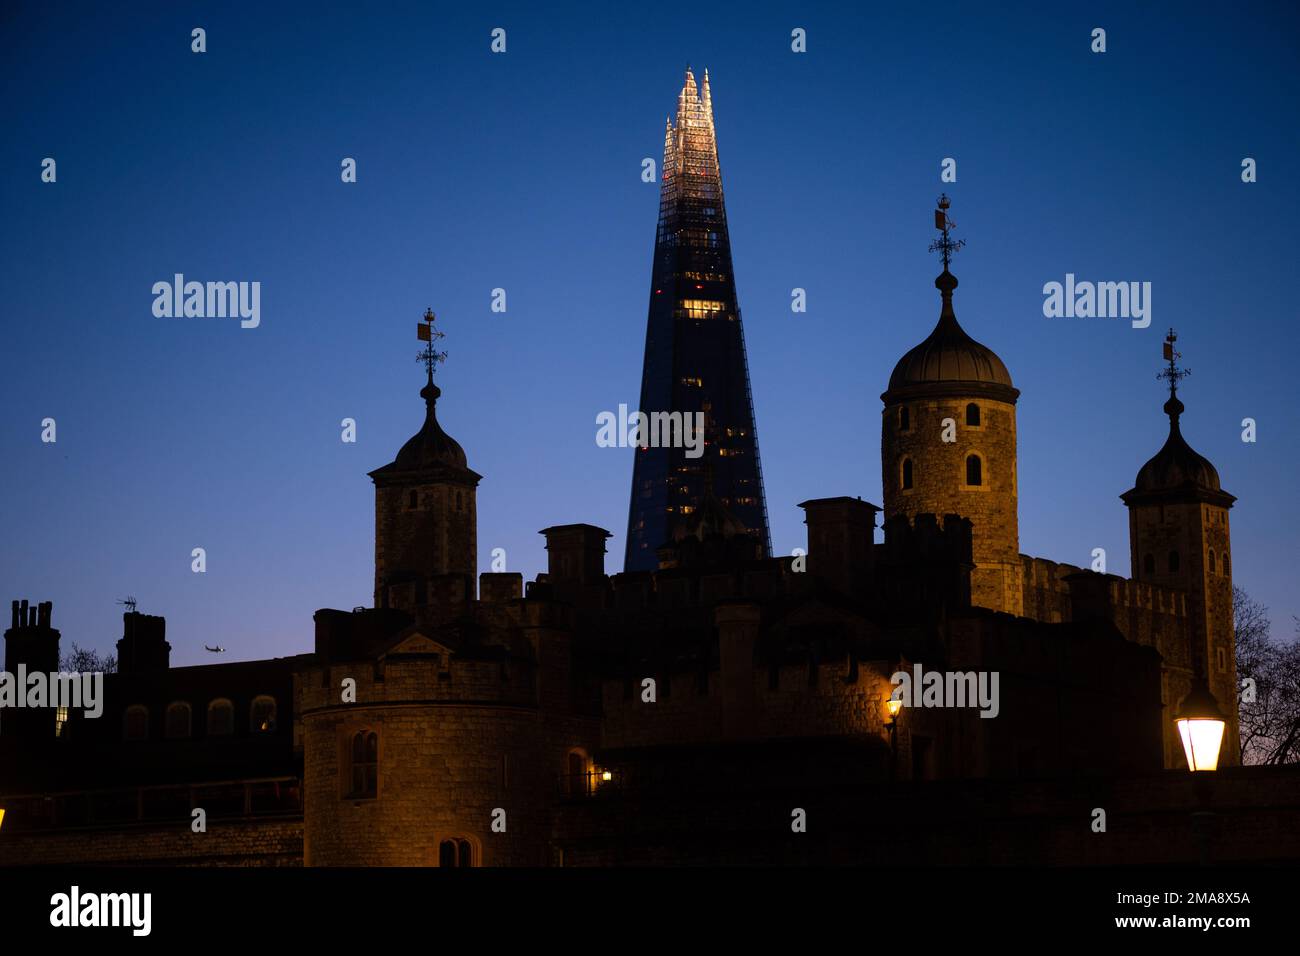 The Shard towers over the Tower of London. New and old in London, UK Stock Photo